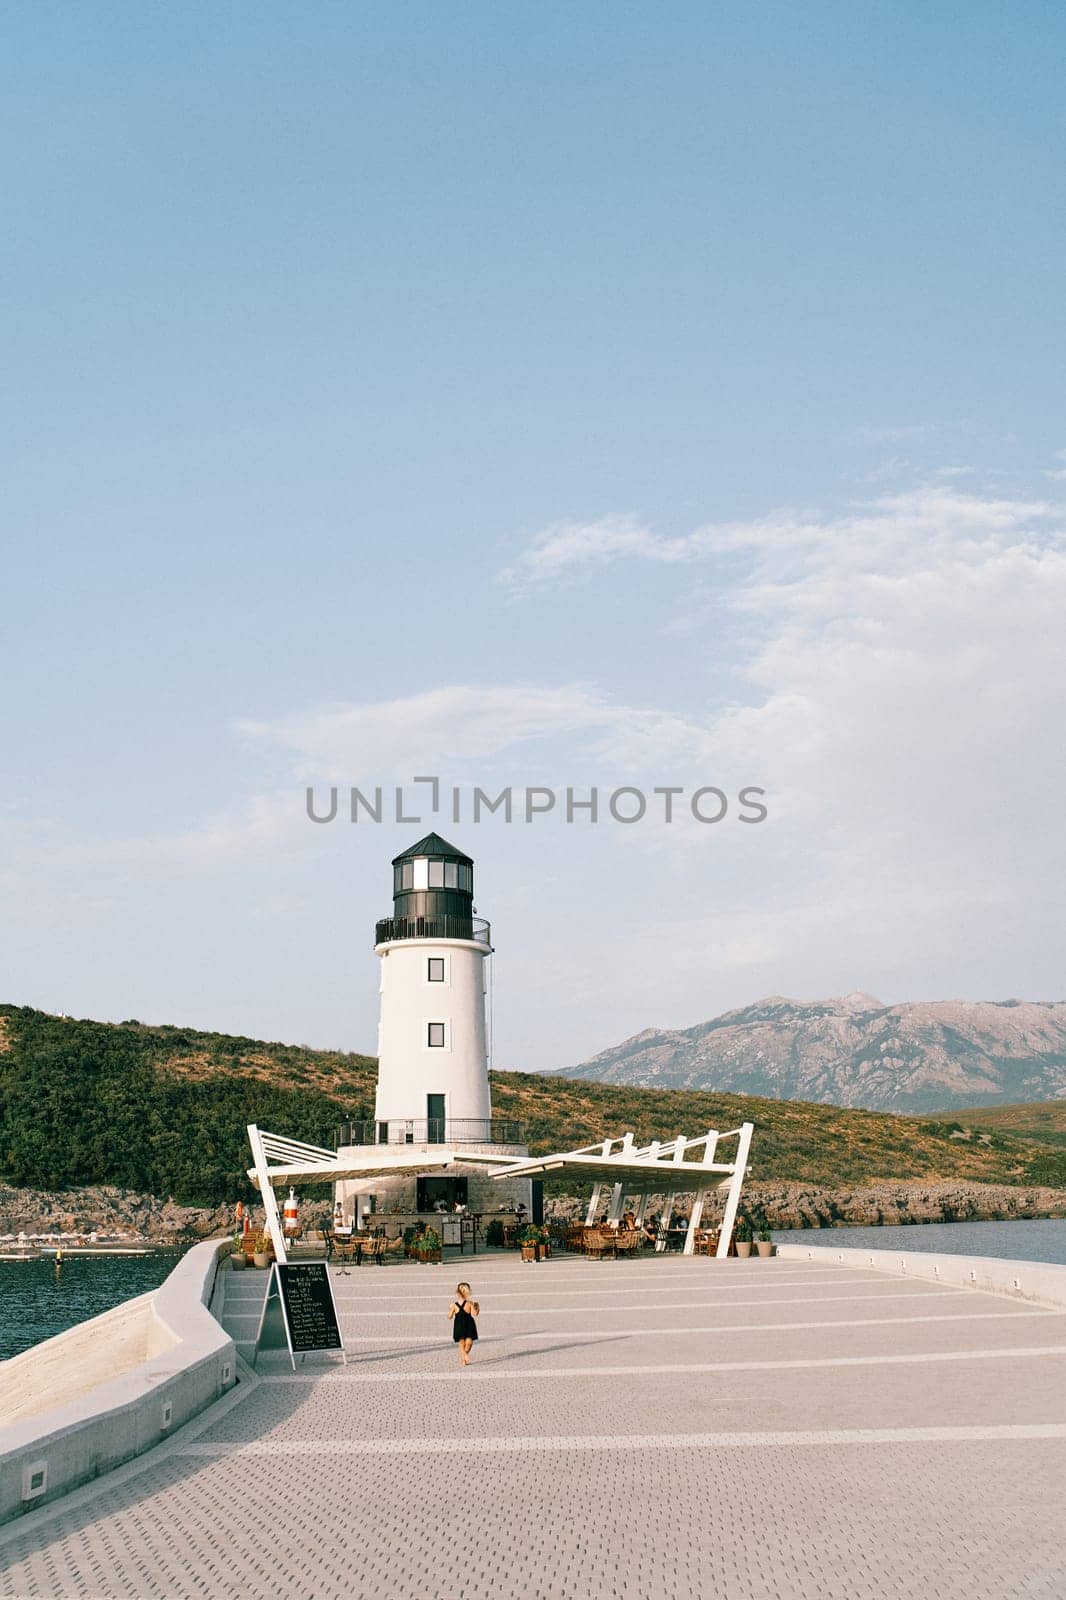 Little girl walks along the pier against the backdrop of a lighthouse with an outdoor restaurant. High quality photo